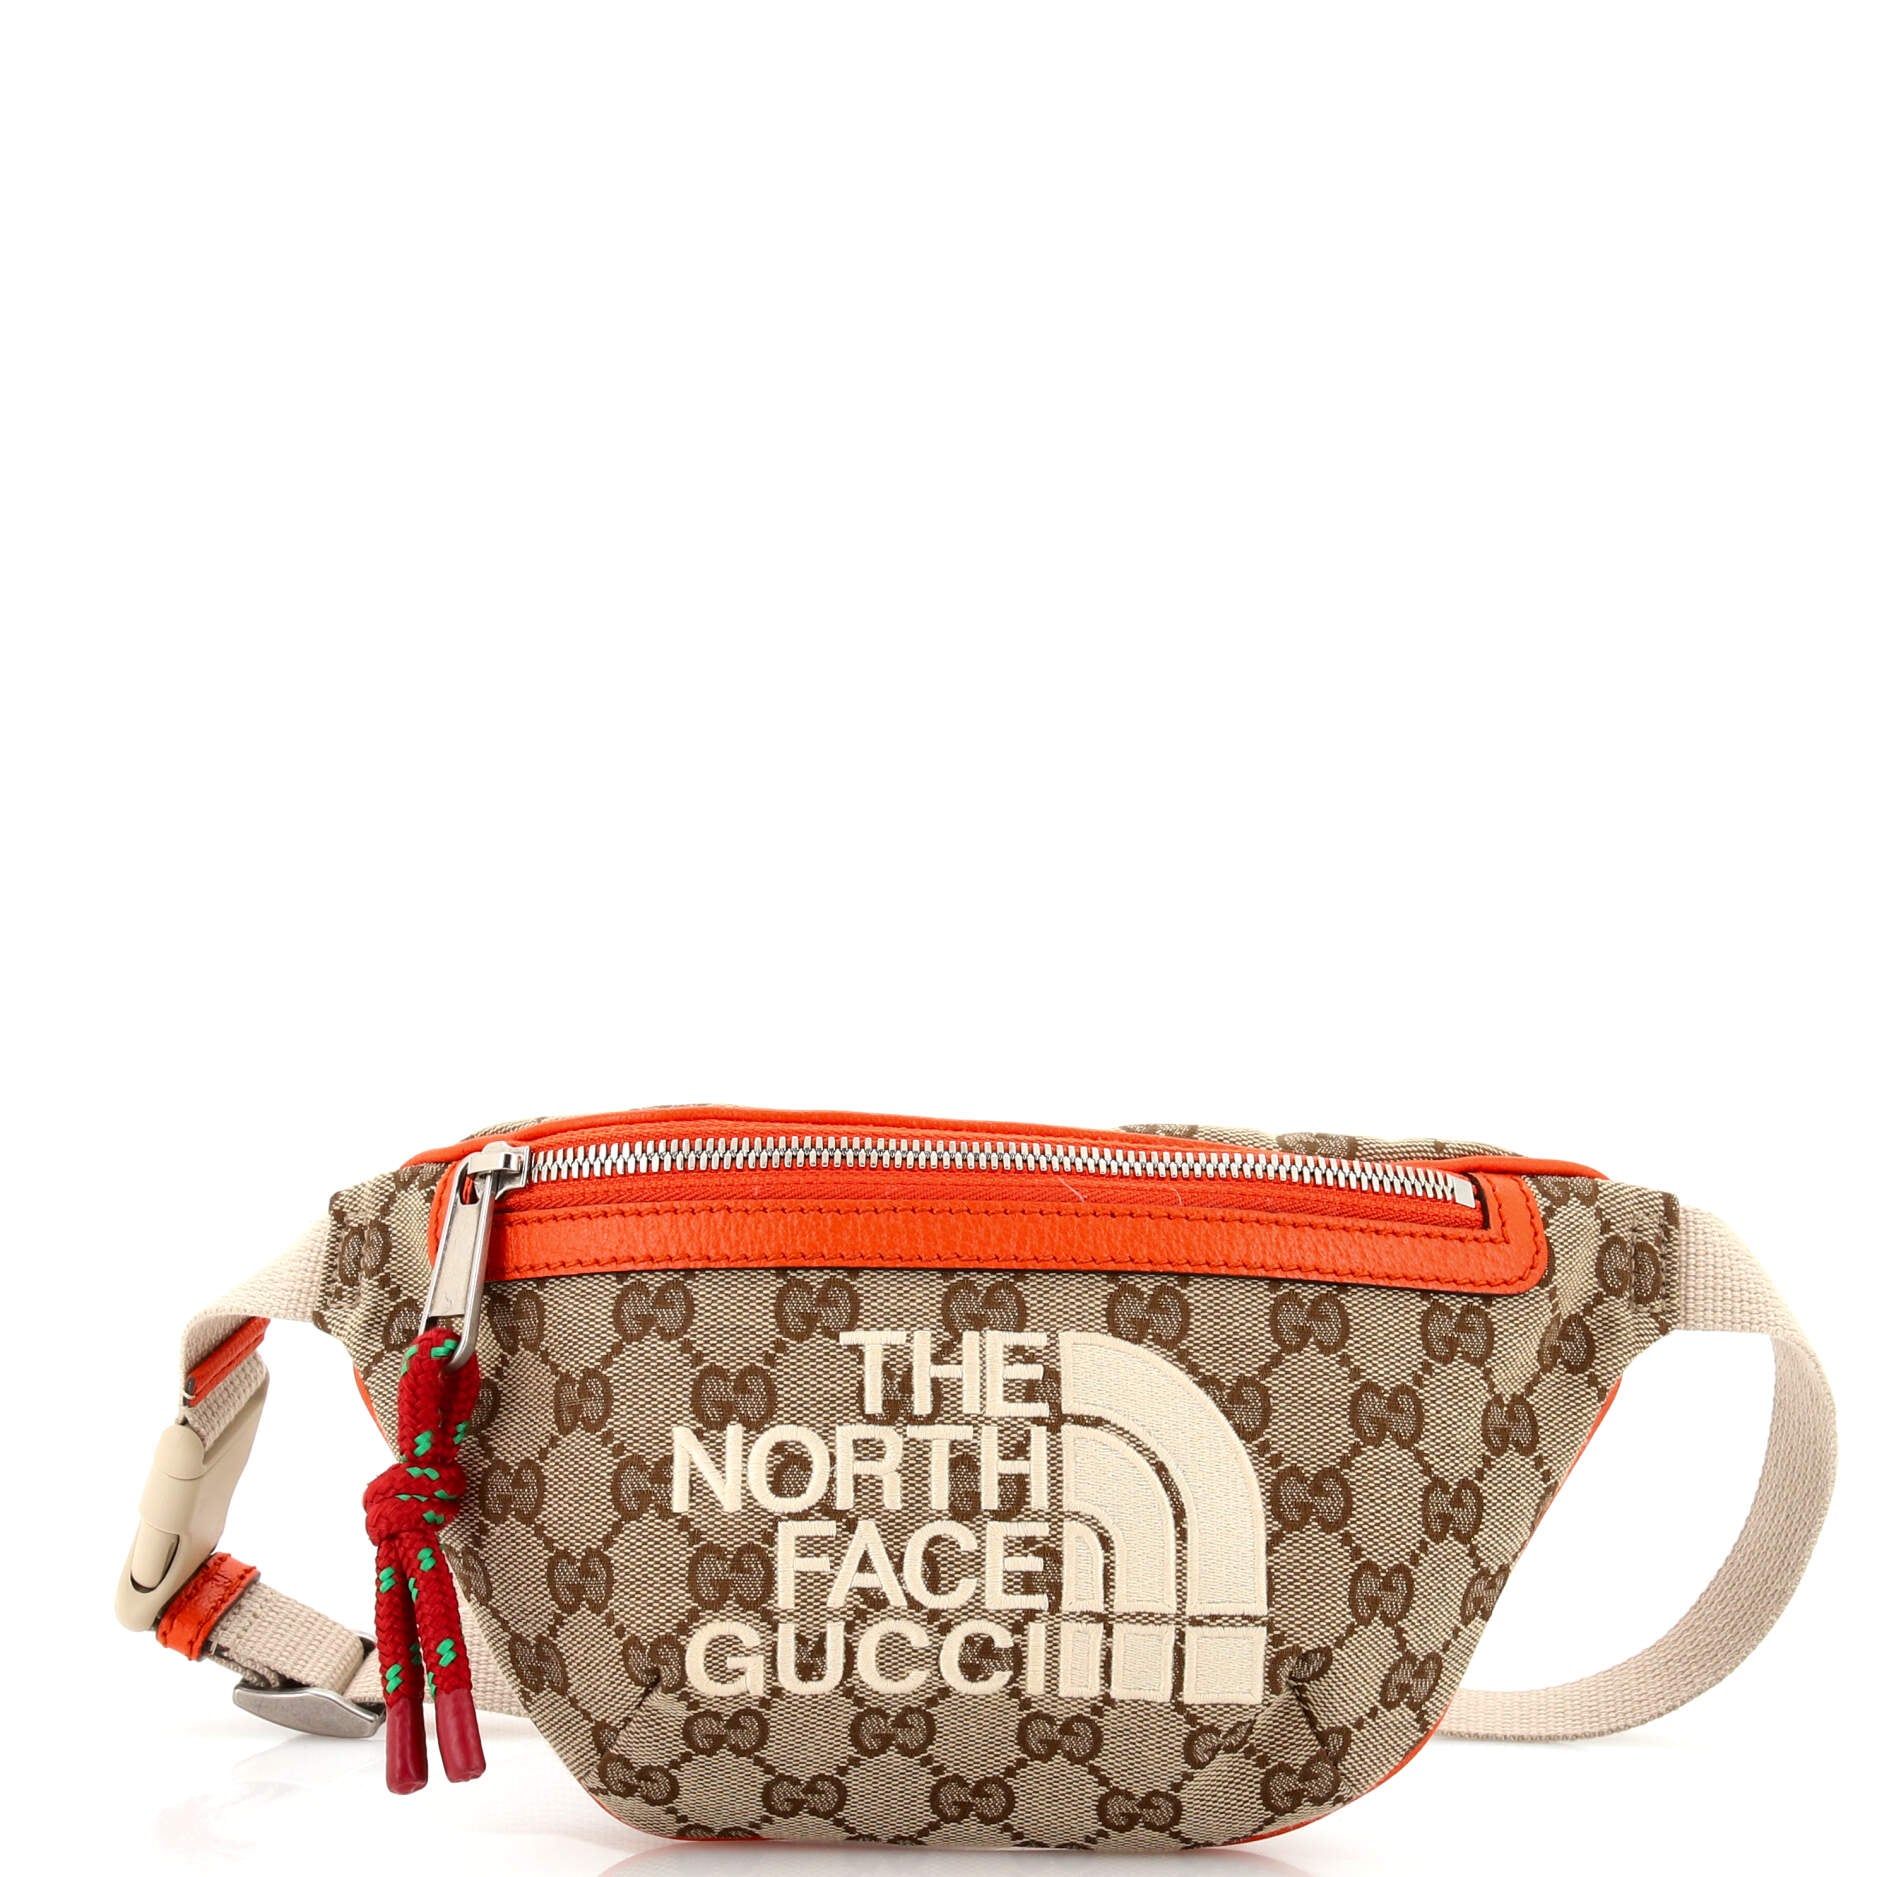 x The North Face Zip Belt Bag GG Canvas with Leather